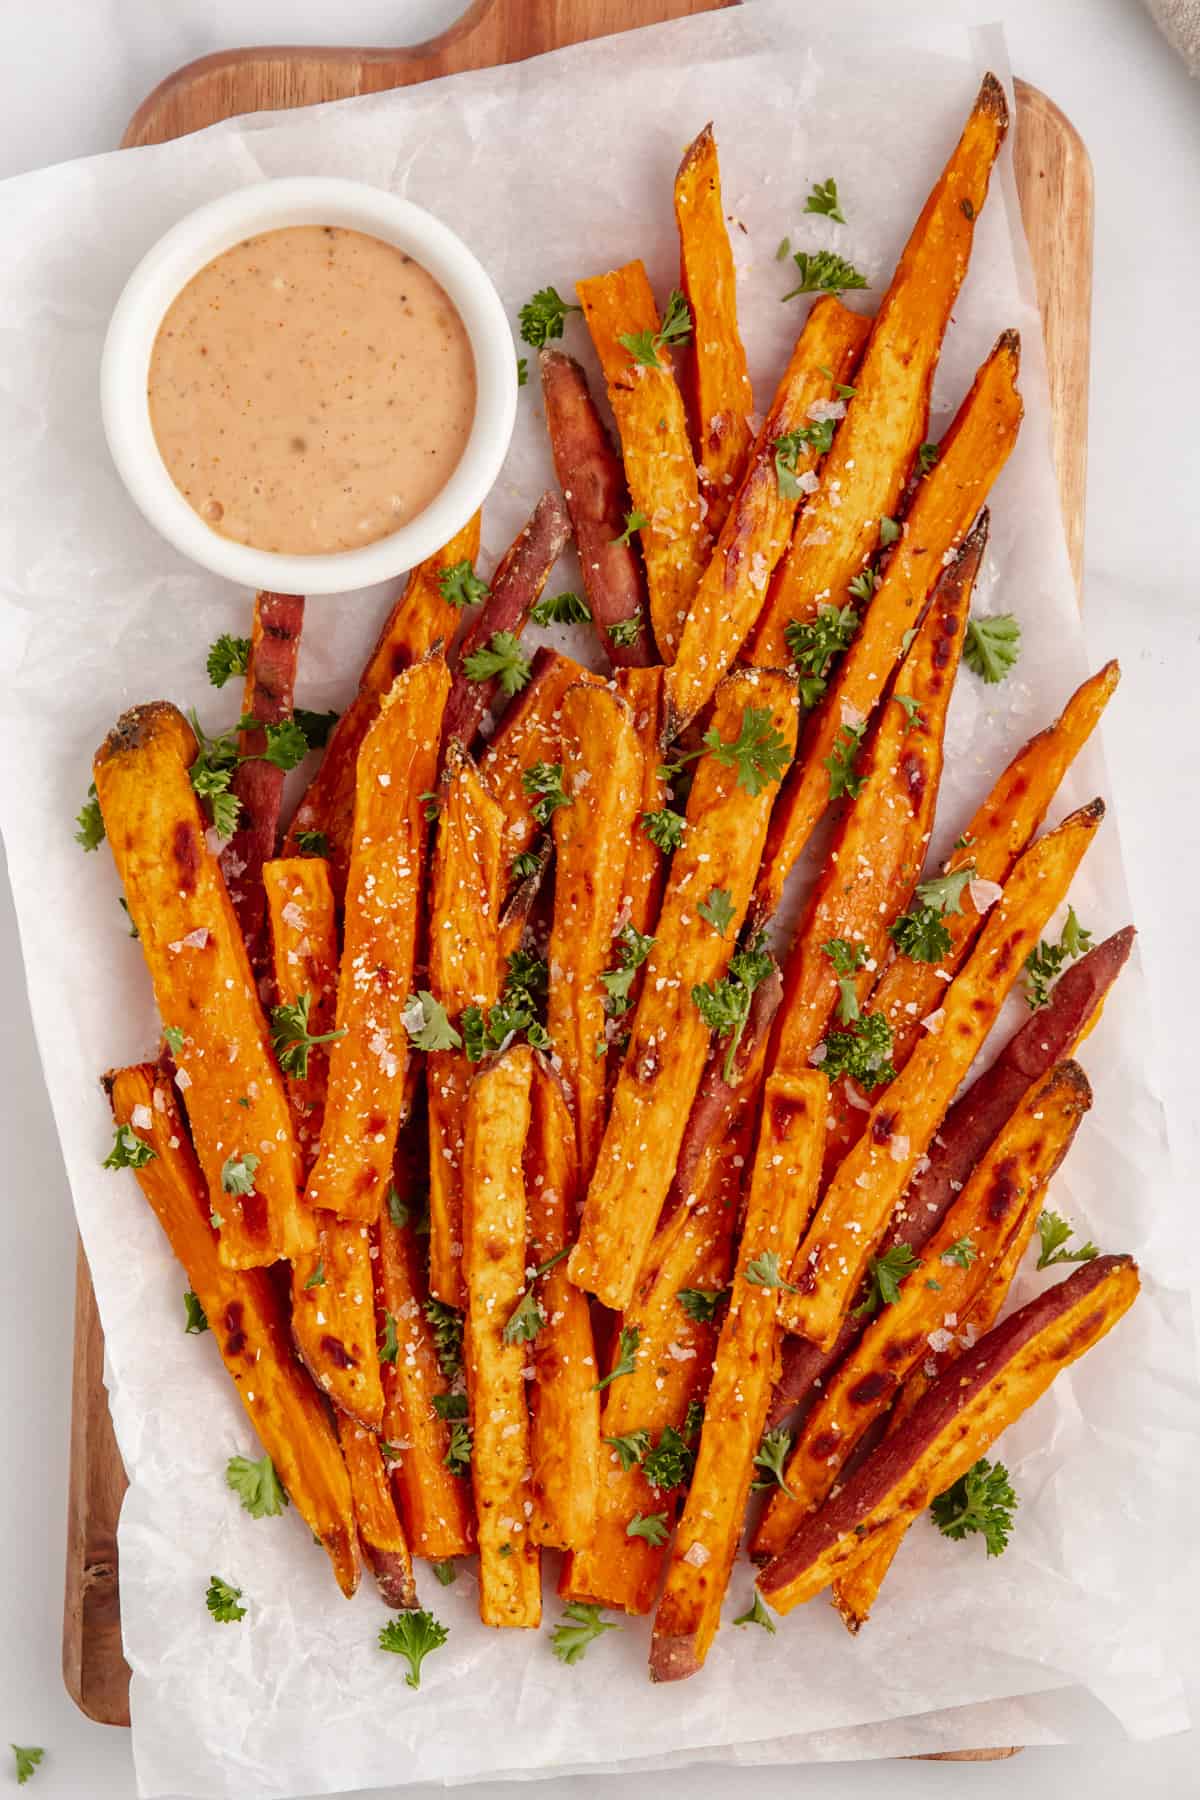 Baked sweet potato fries topped with salt and fresh herbs and a side of dipping sauce.